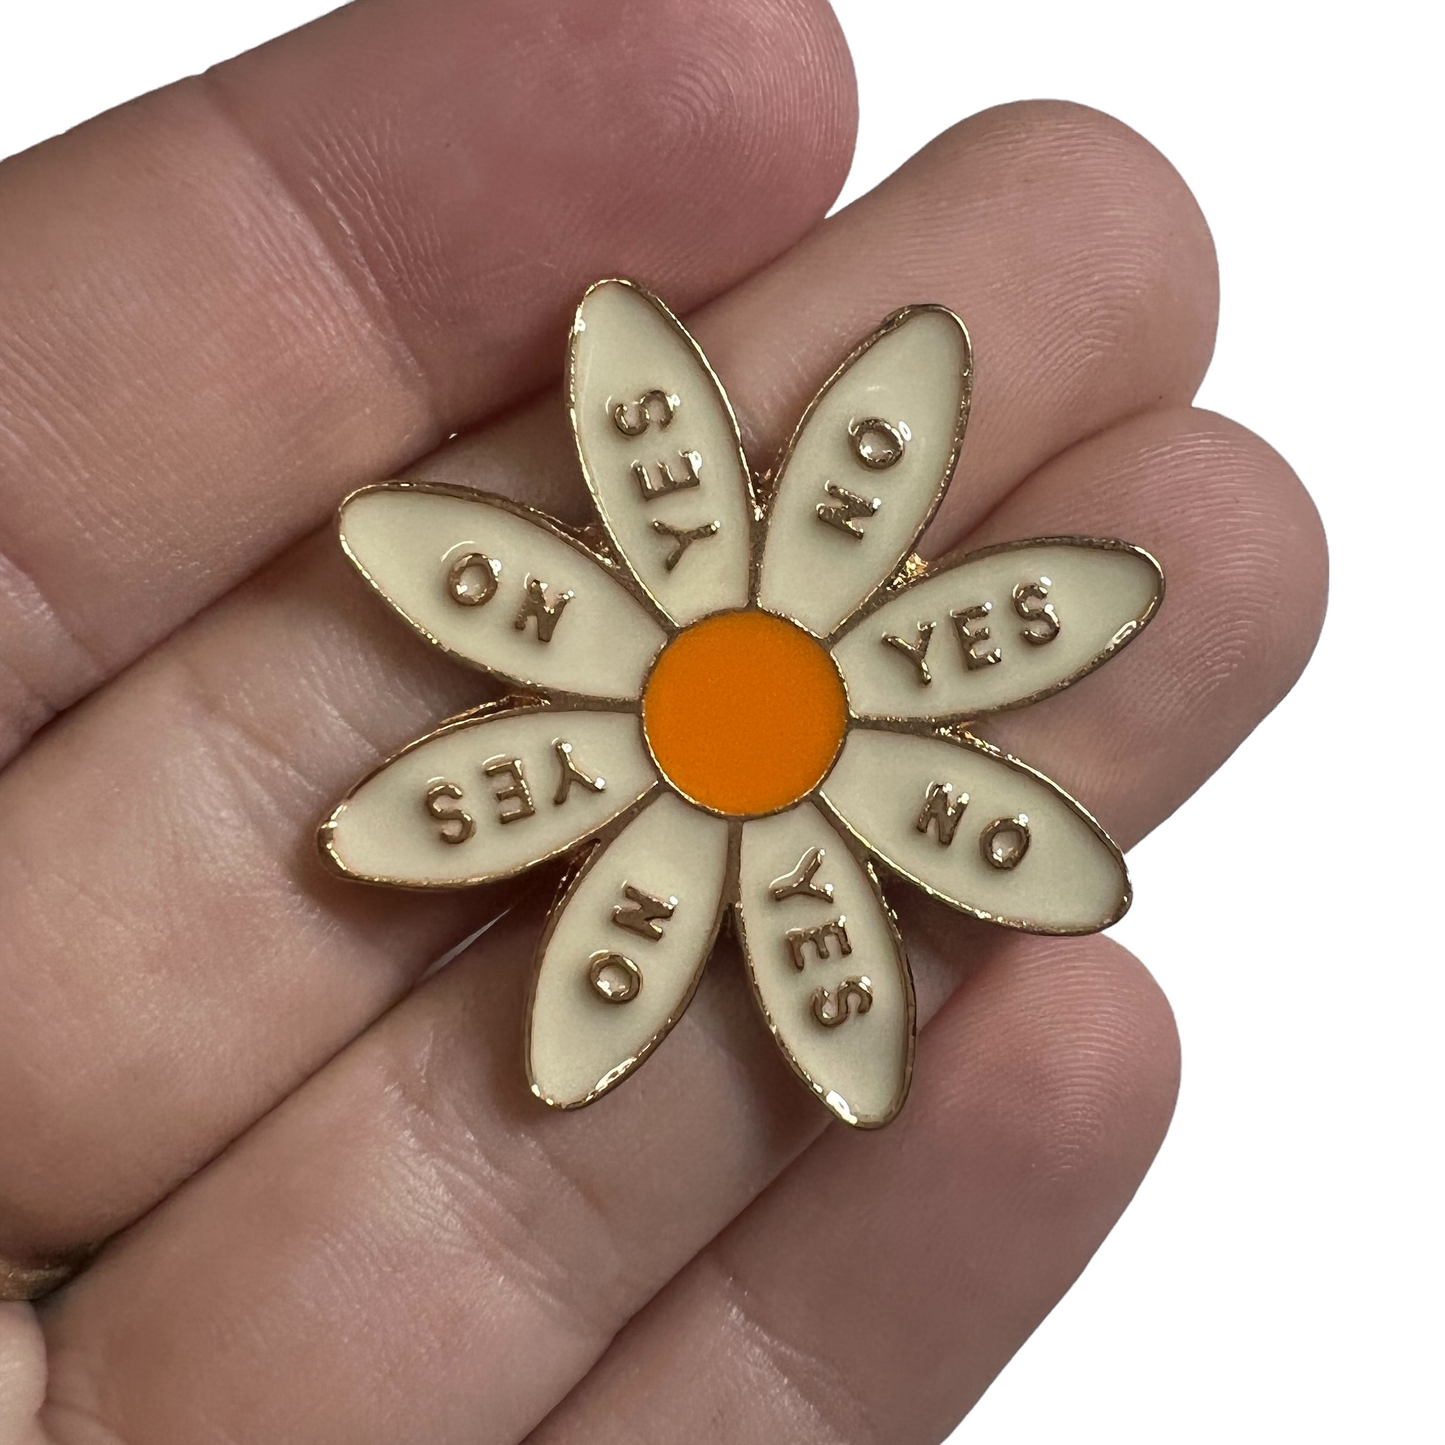 Pin — 'Yes No Daisy'  SPIRIT SPARKPLUGS Yes No Flower  